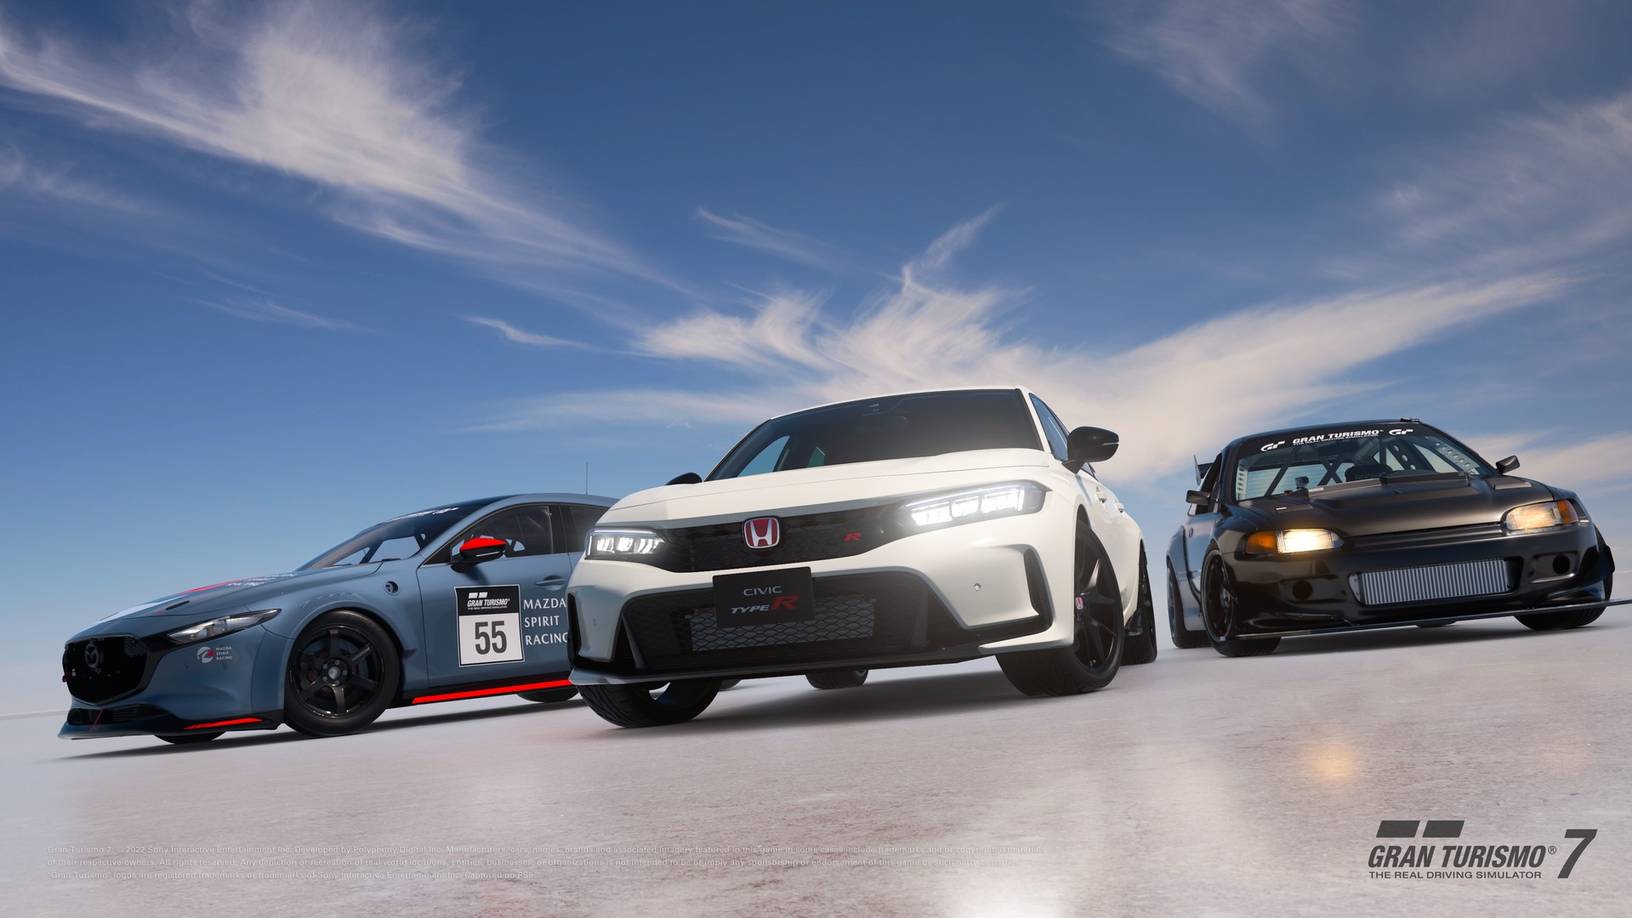 Gran Turismo 7 Update 1.31 going live today with 5 new cars, 2 new layouts  for Nurburgring, and a new Scapes location – PlayStation.Blog